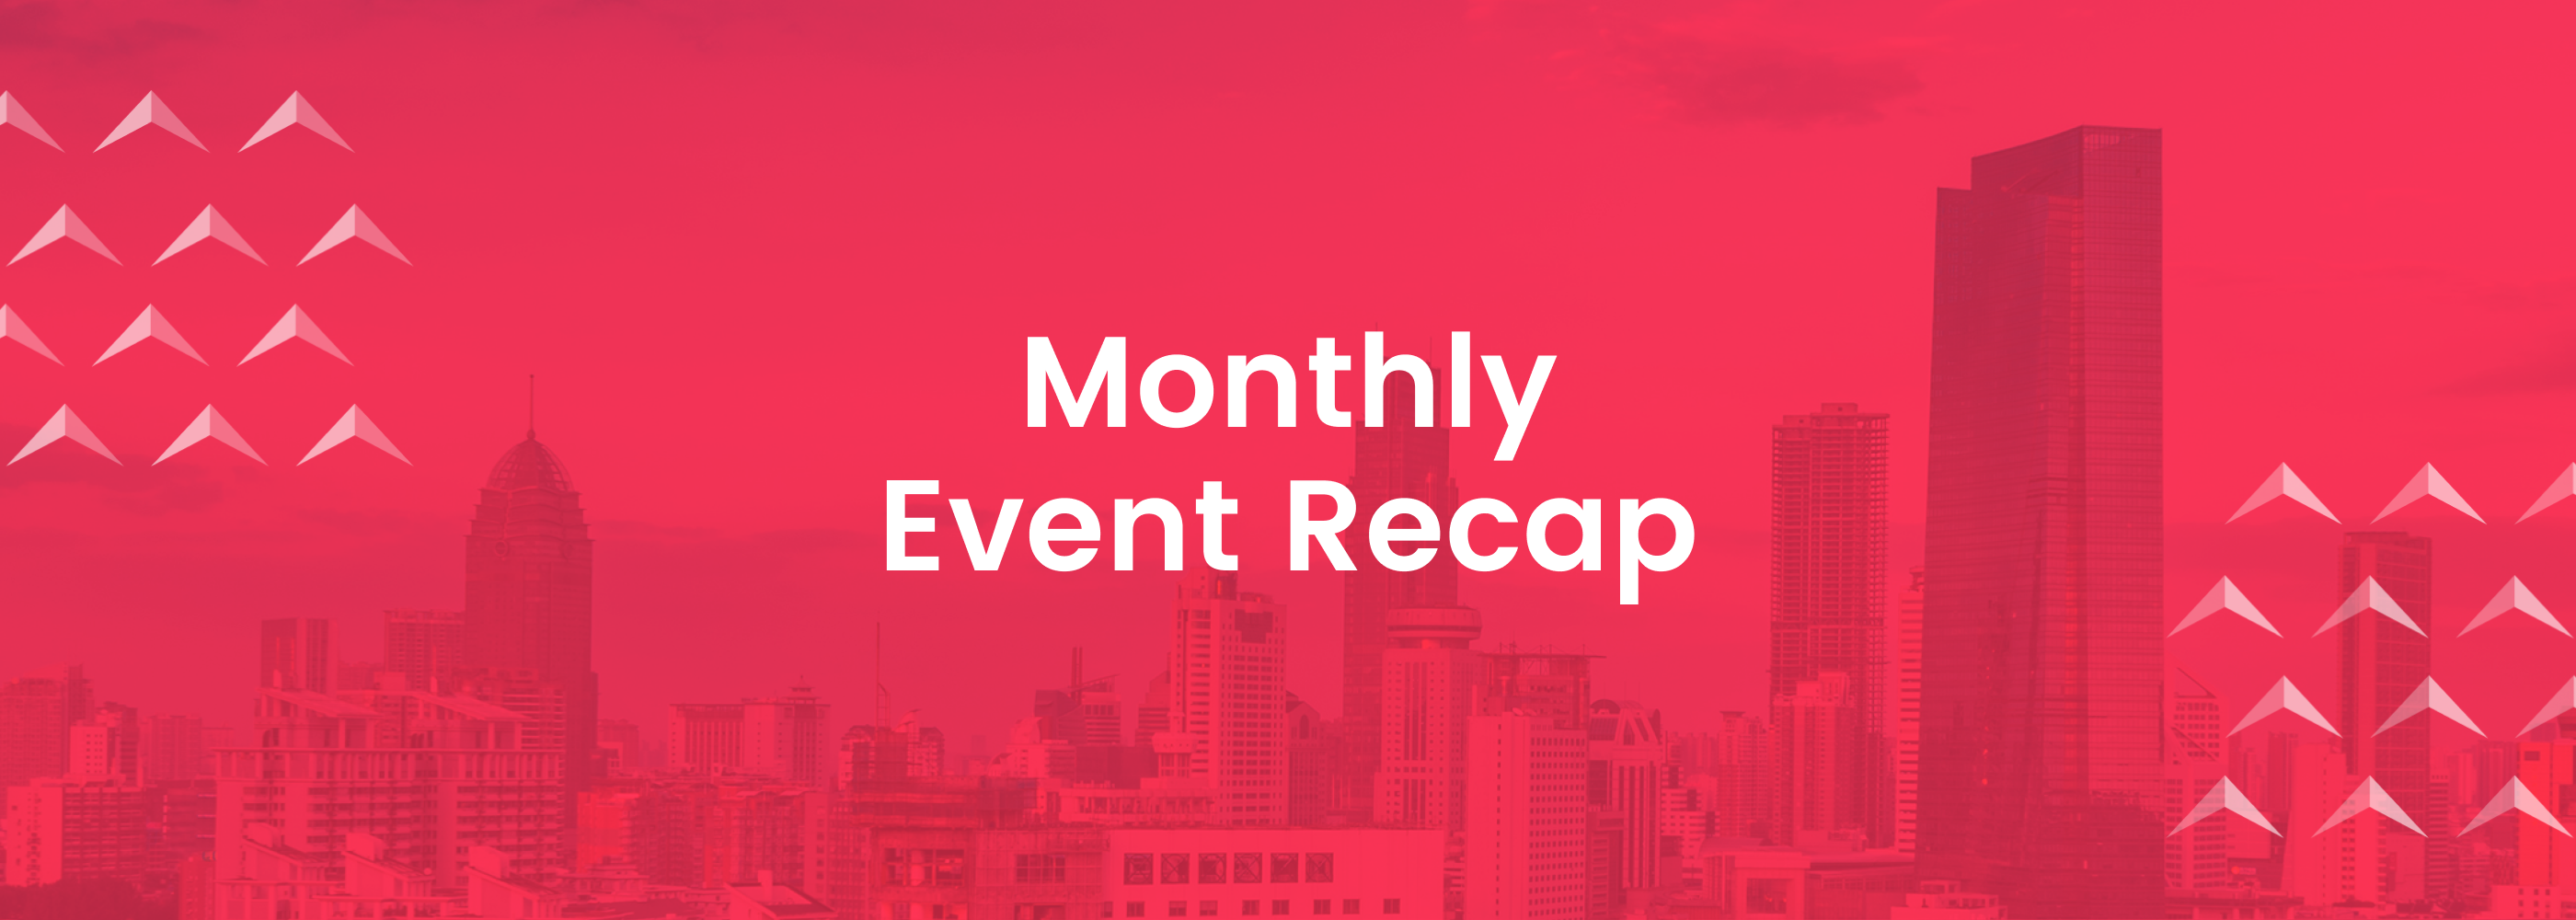 Monthly Recap: Event Highlights from November 1-30, 2021